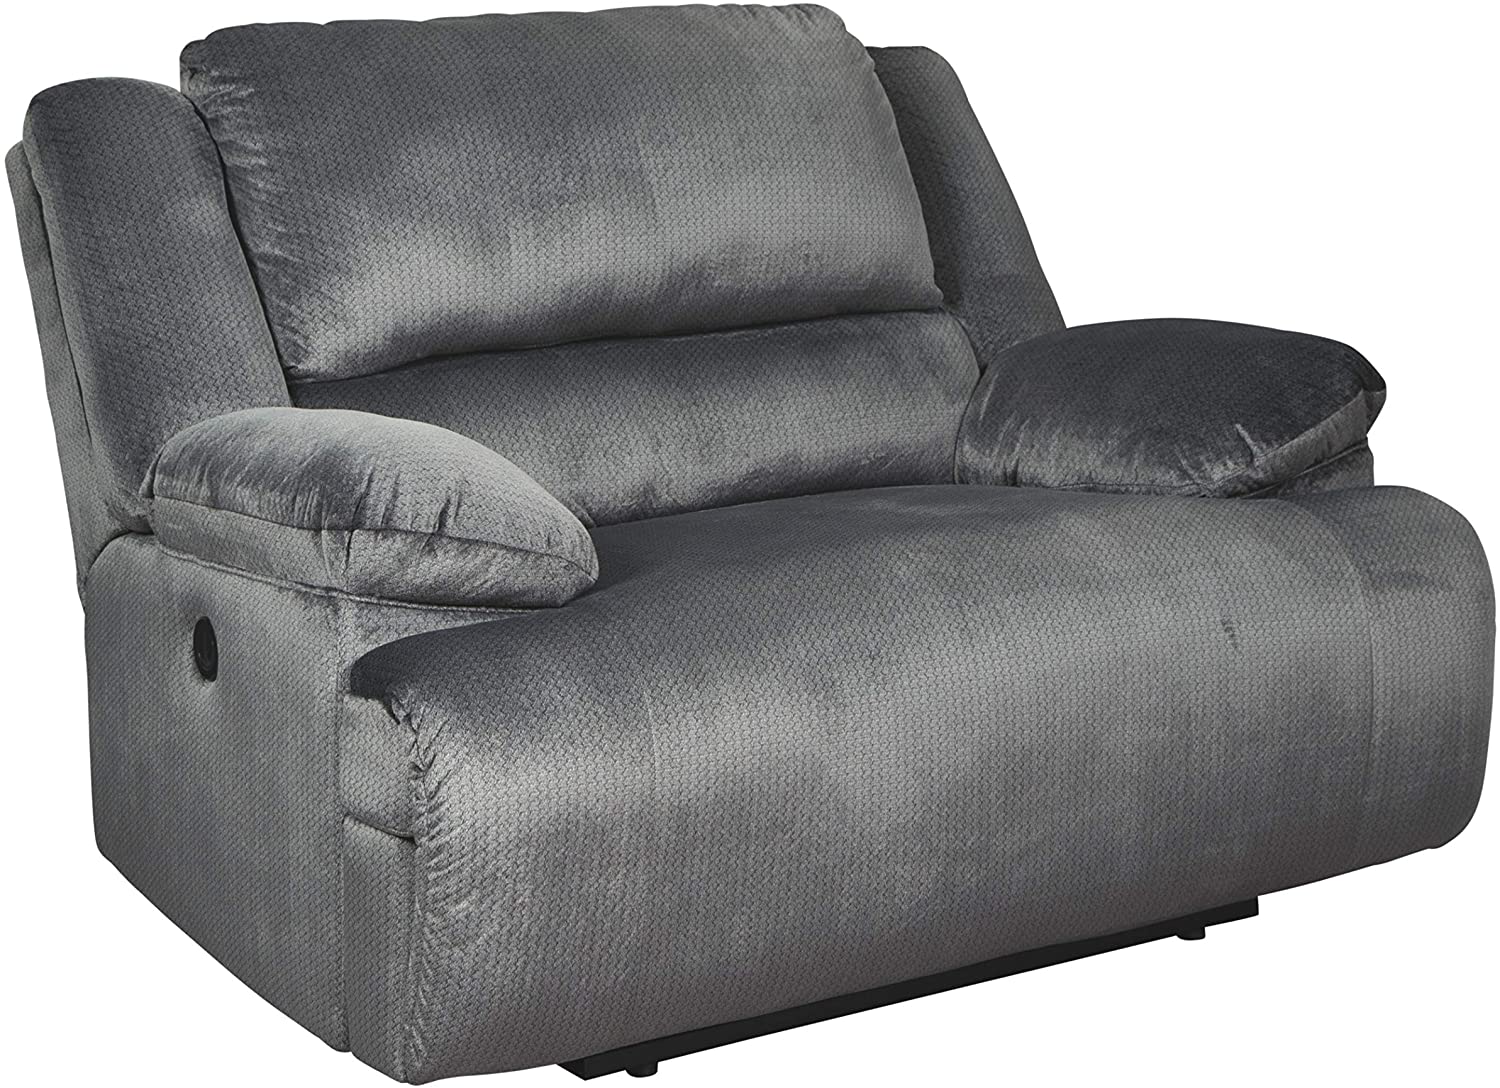 Signature Design by Ashley Clonmel Oversized Recliner